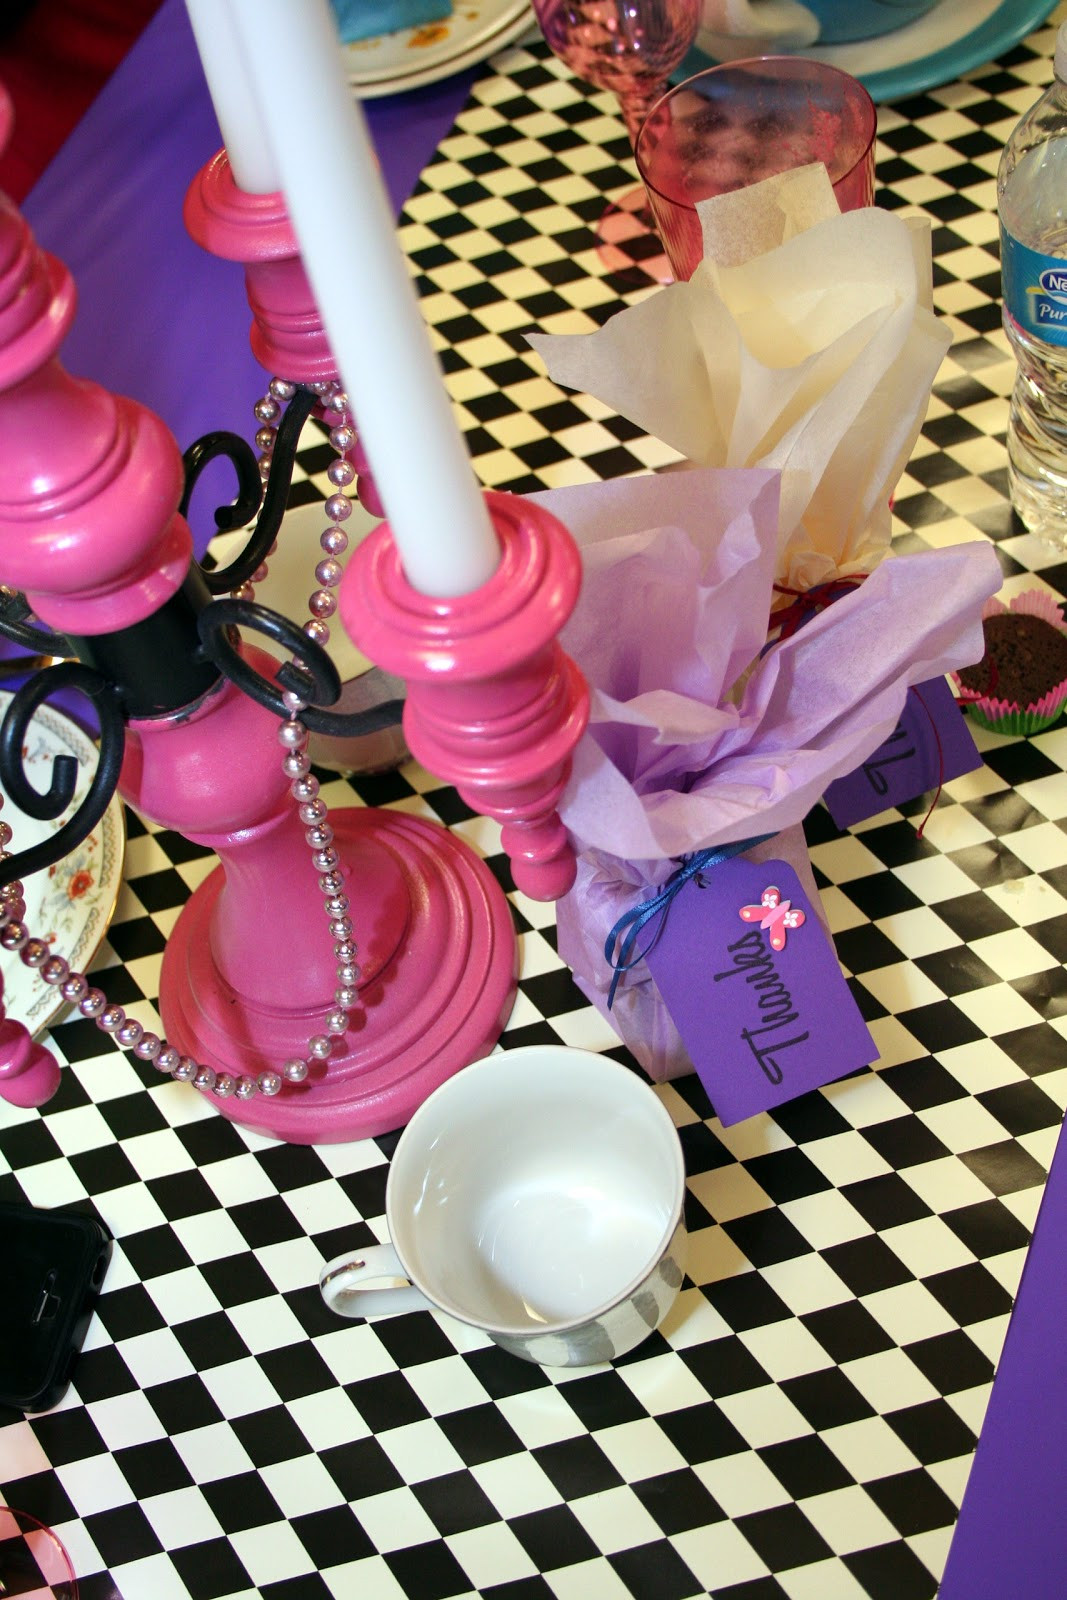 Mad Hatter Tea Party Decoration Ideas
 A Busy Mom s Blog Mad Hatter Tea Party Decorations DIY